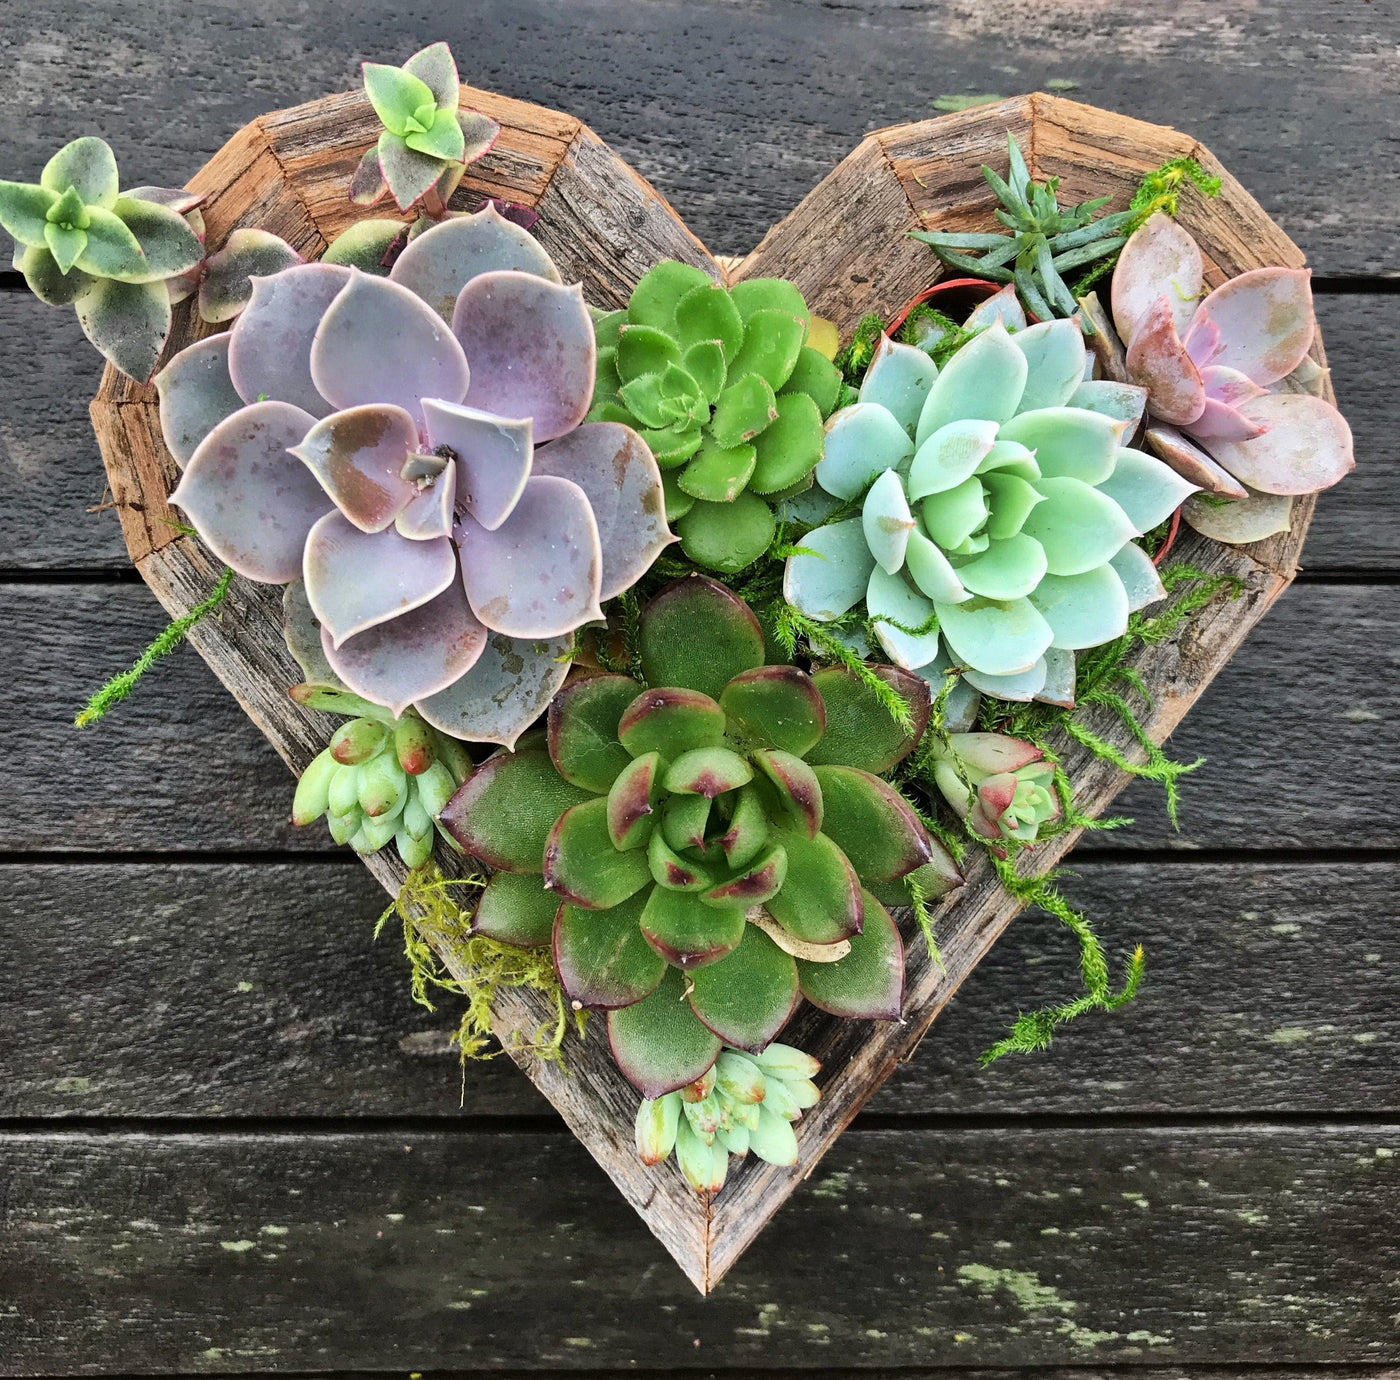 This succulent heart frame kit provides everything you need for the perfect gift.  The kit comes with succulents, design and care instructions, and redwood decorative frame.  Hang on the wall or use as a table centerpiece for your home decor!